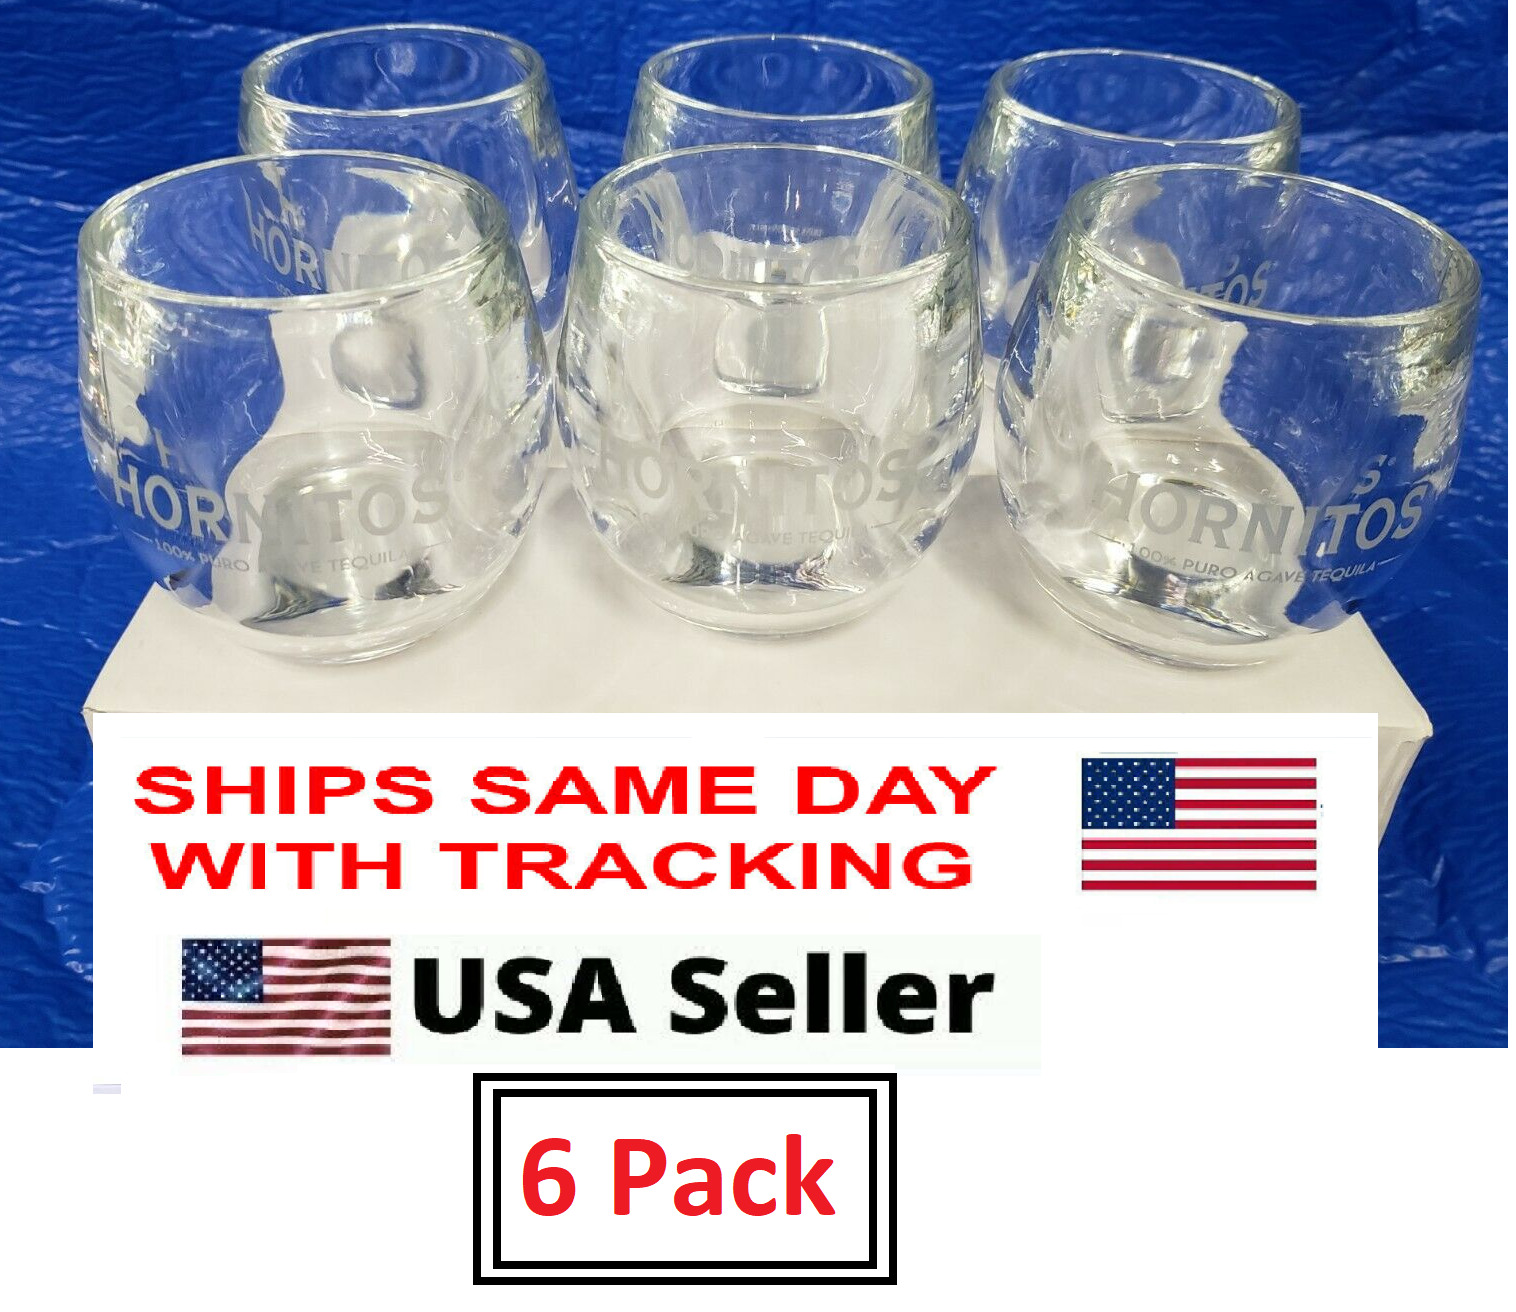 6 Hornitos Tequila Thick Drinking Glasses Etched 100% Puro Agave Bar Grill Home